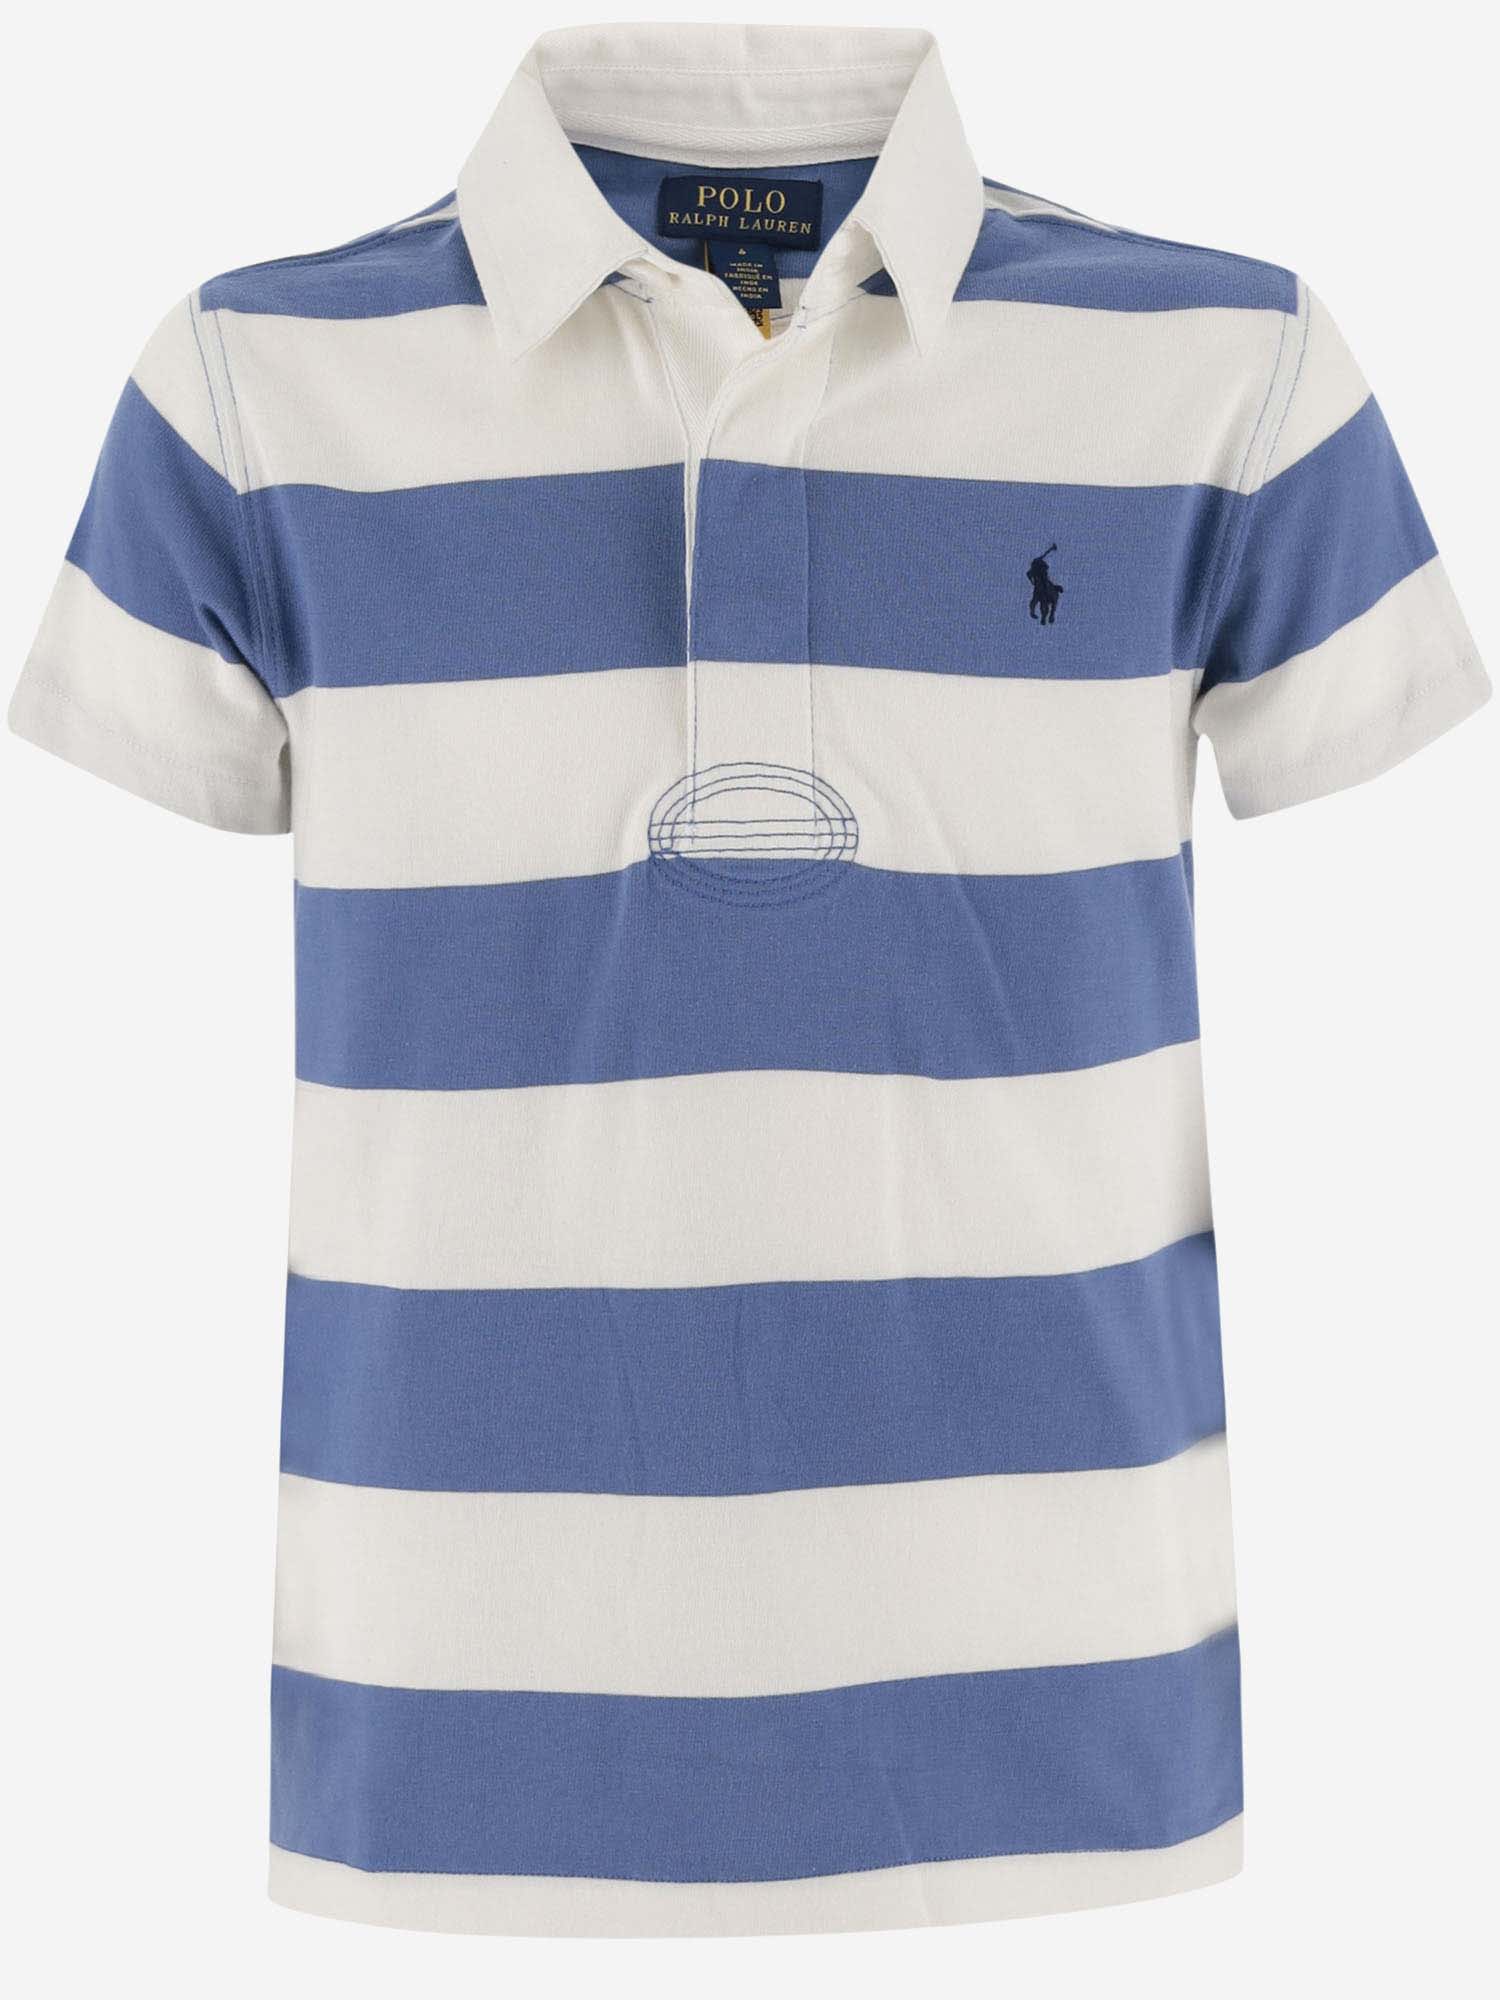 Polo Ralph Lauren Kids' Cotton Polo Shirt With Logo And Striped Pattern In Nimes Blue/deck Wash White